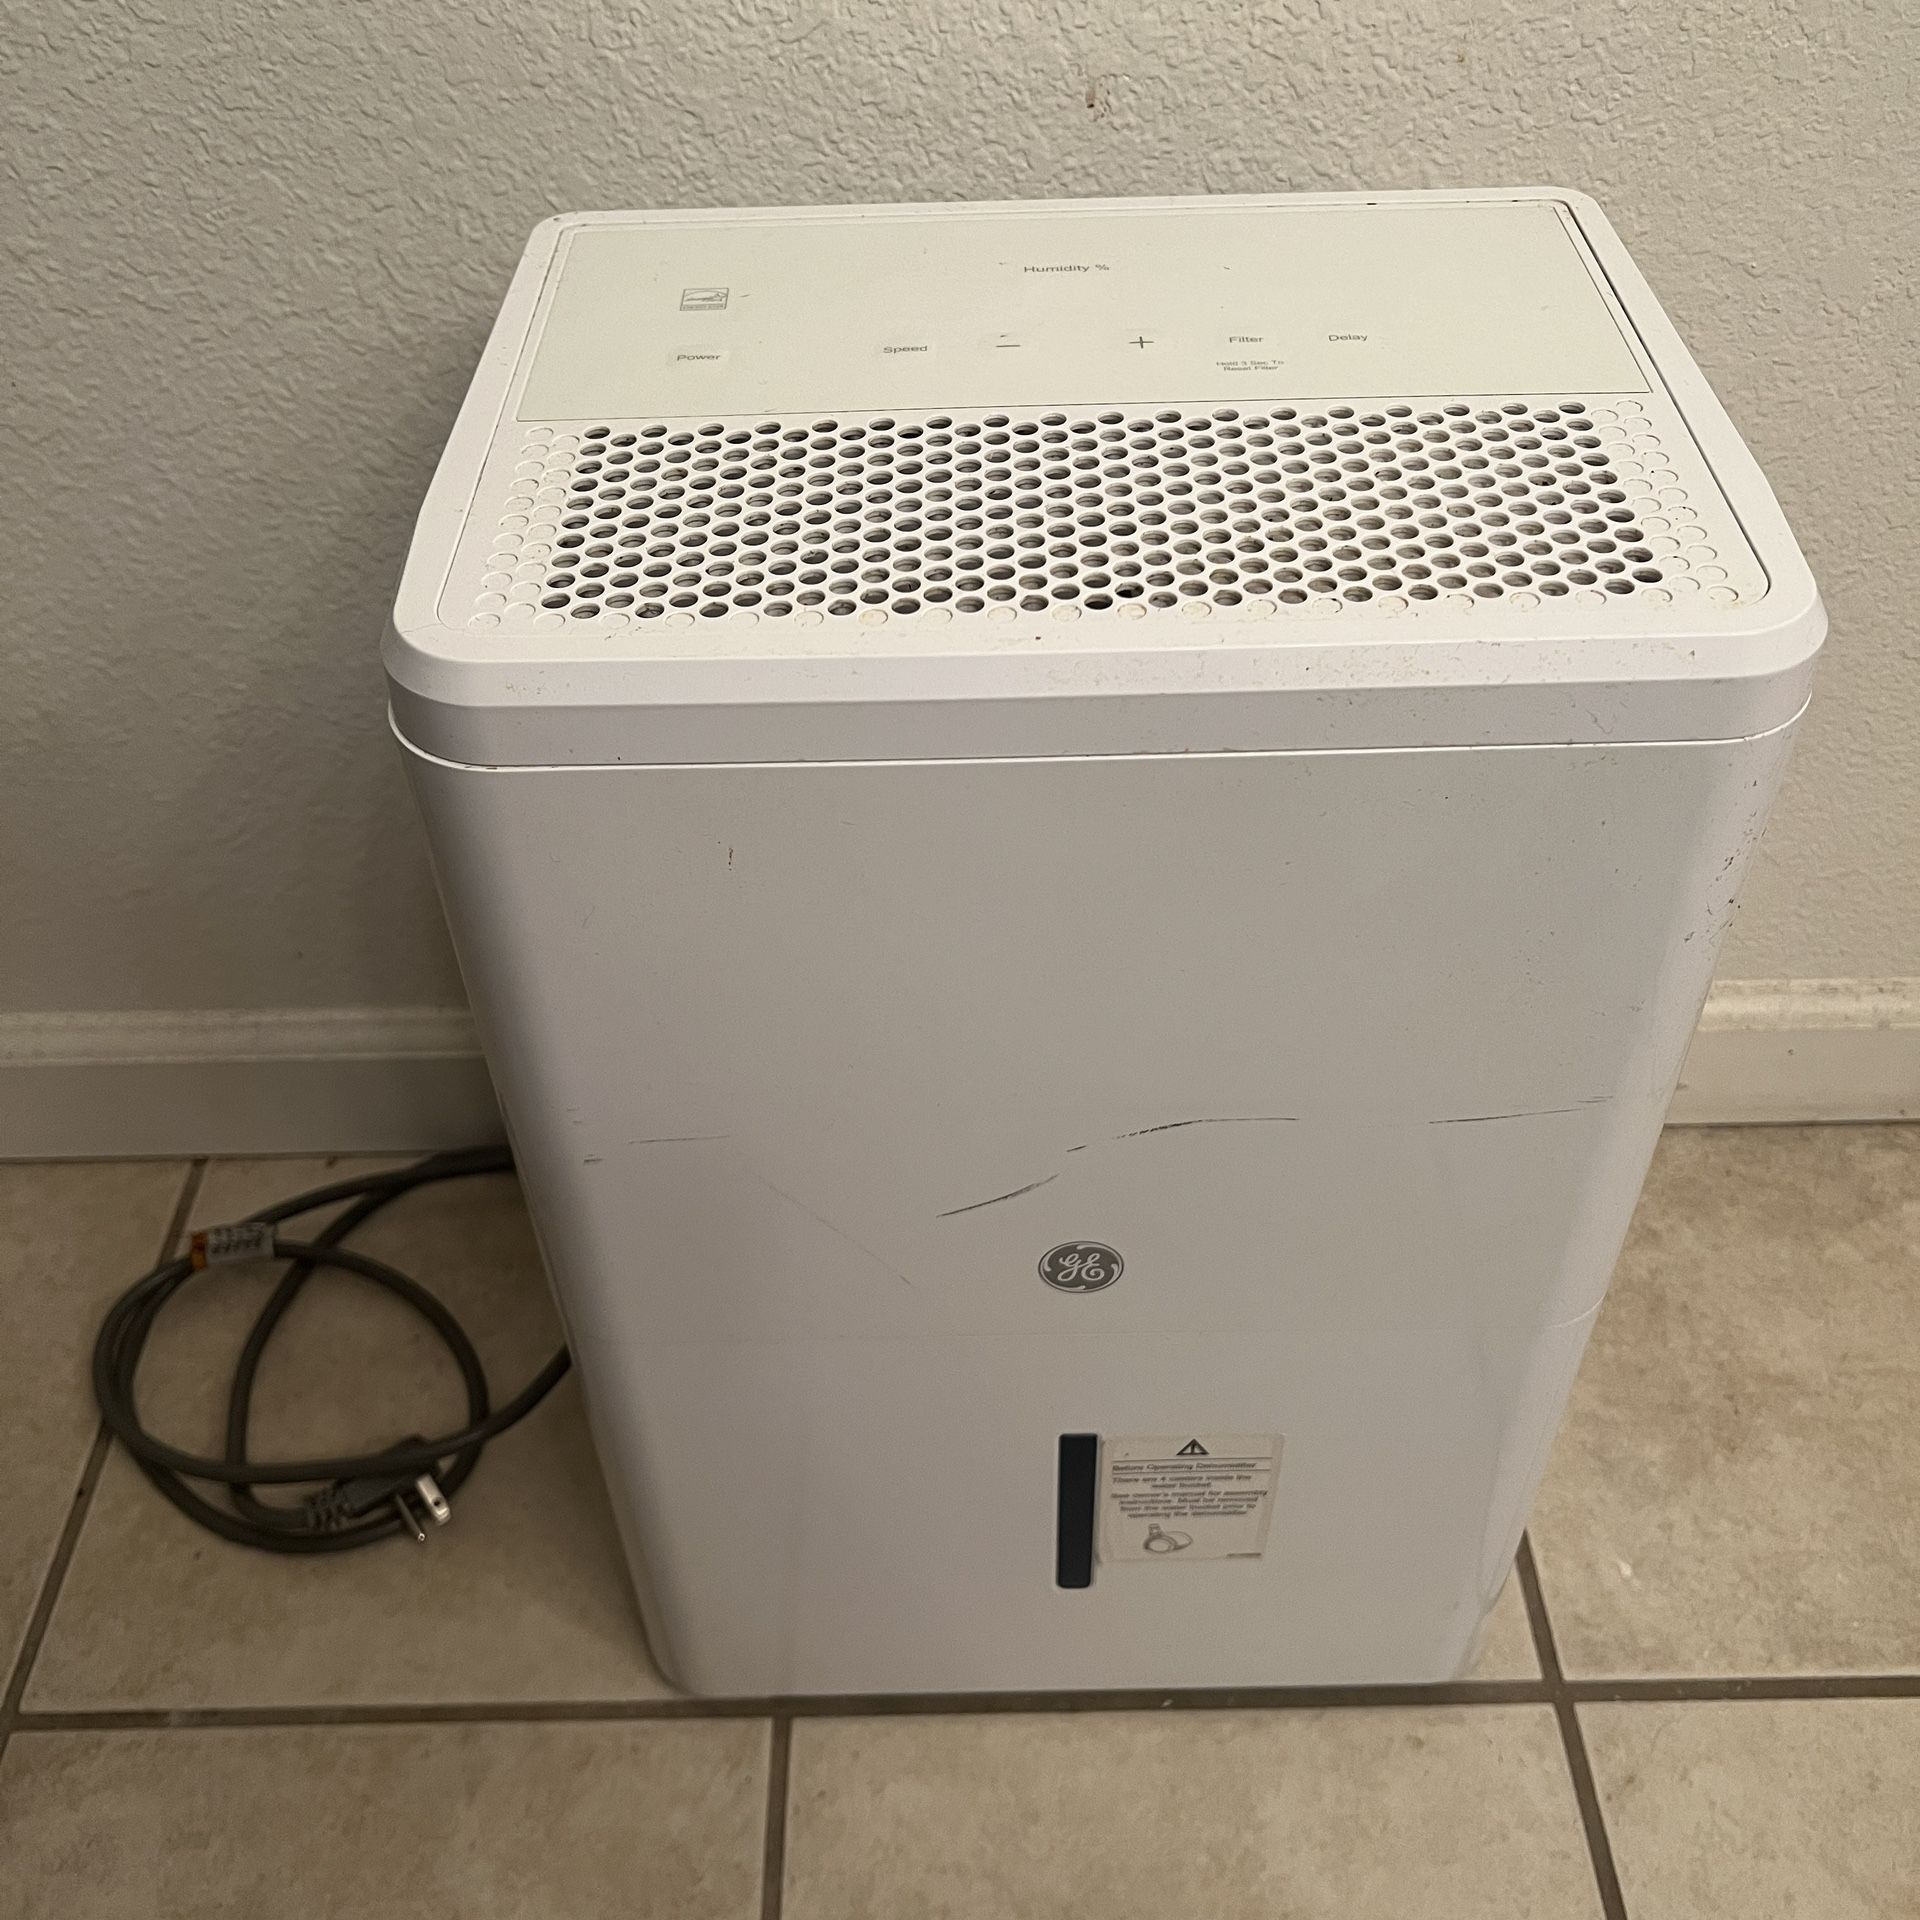 GE 22 Pint Dehumidifier up to 1500 sq. Ft